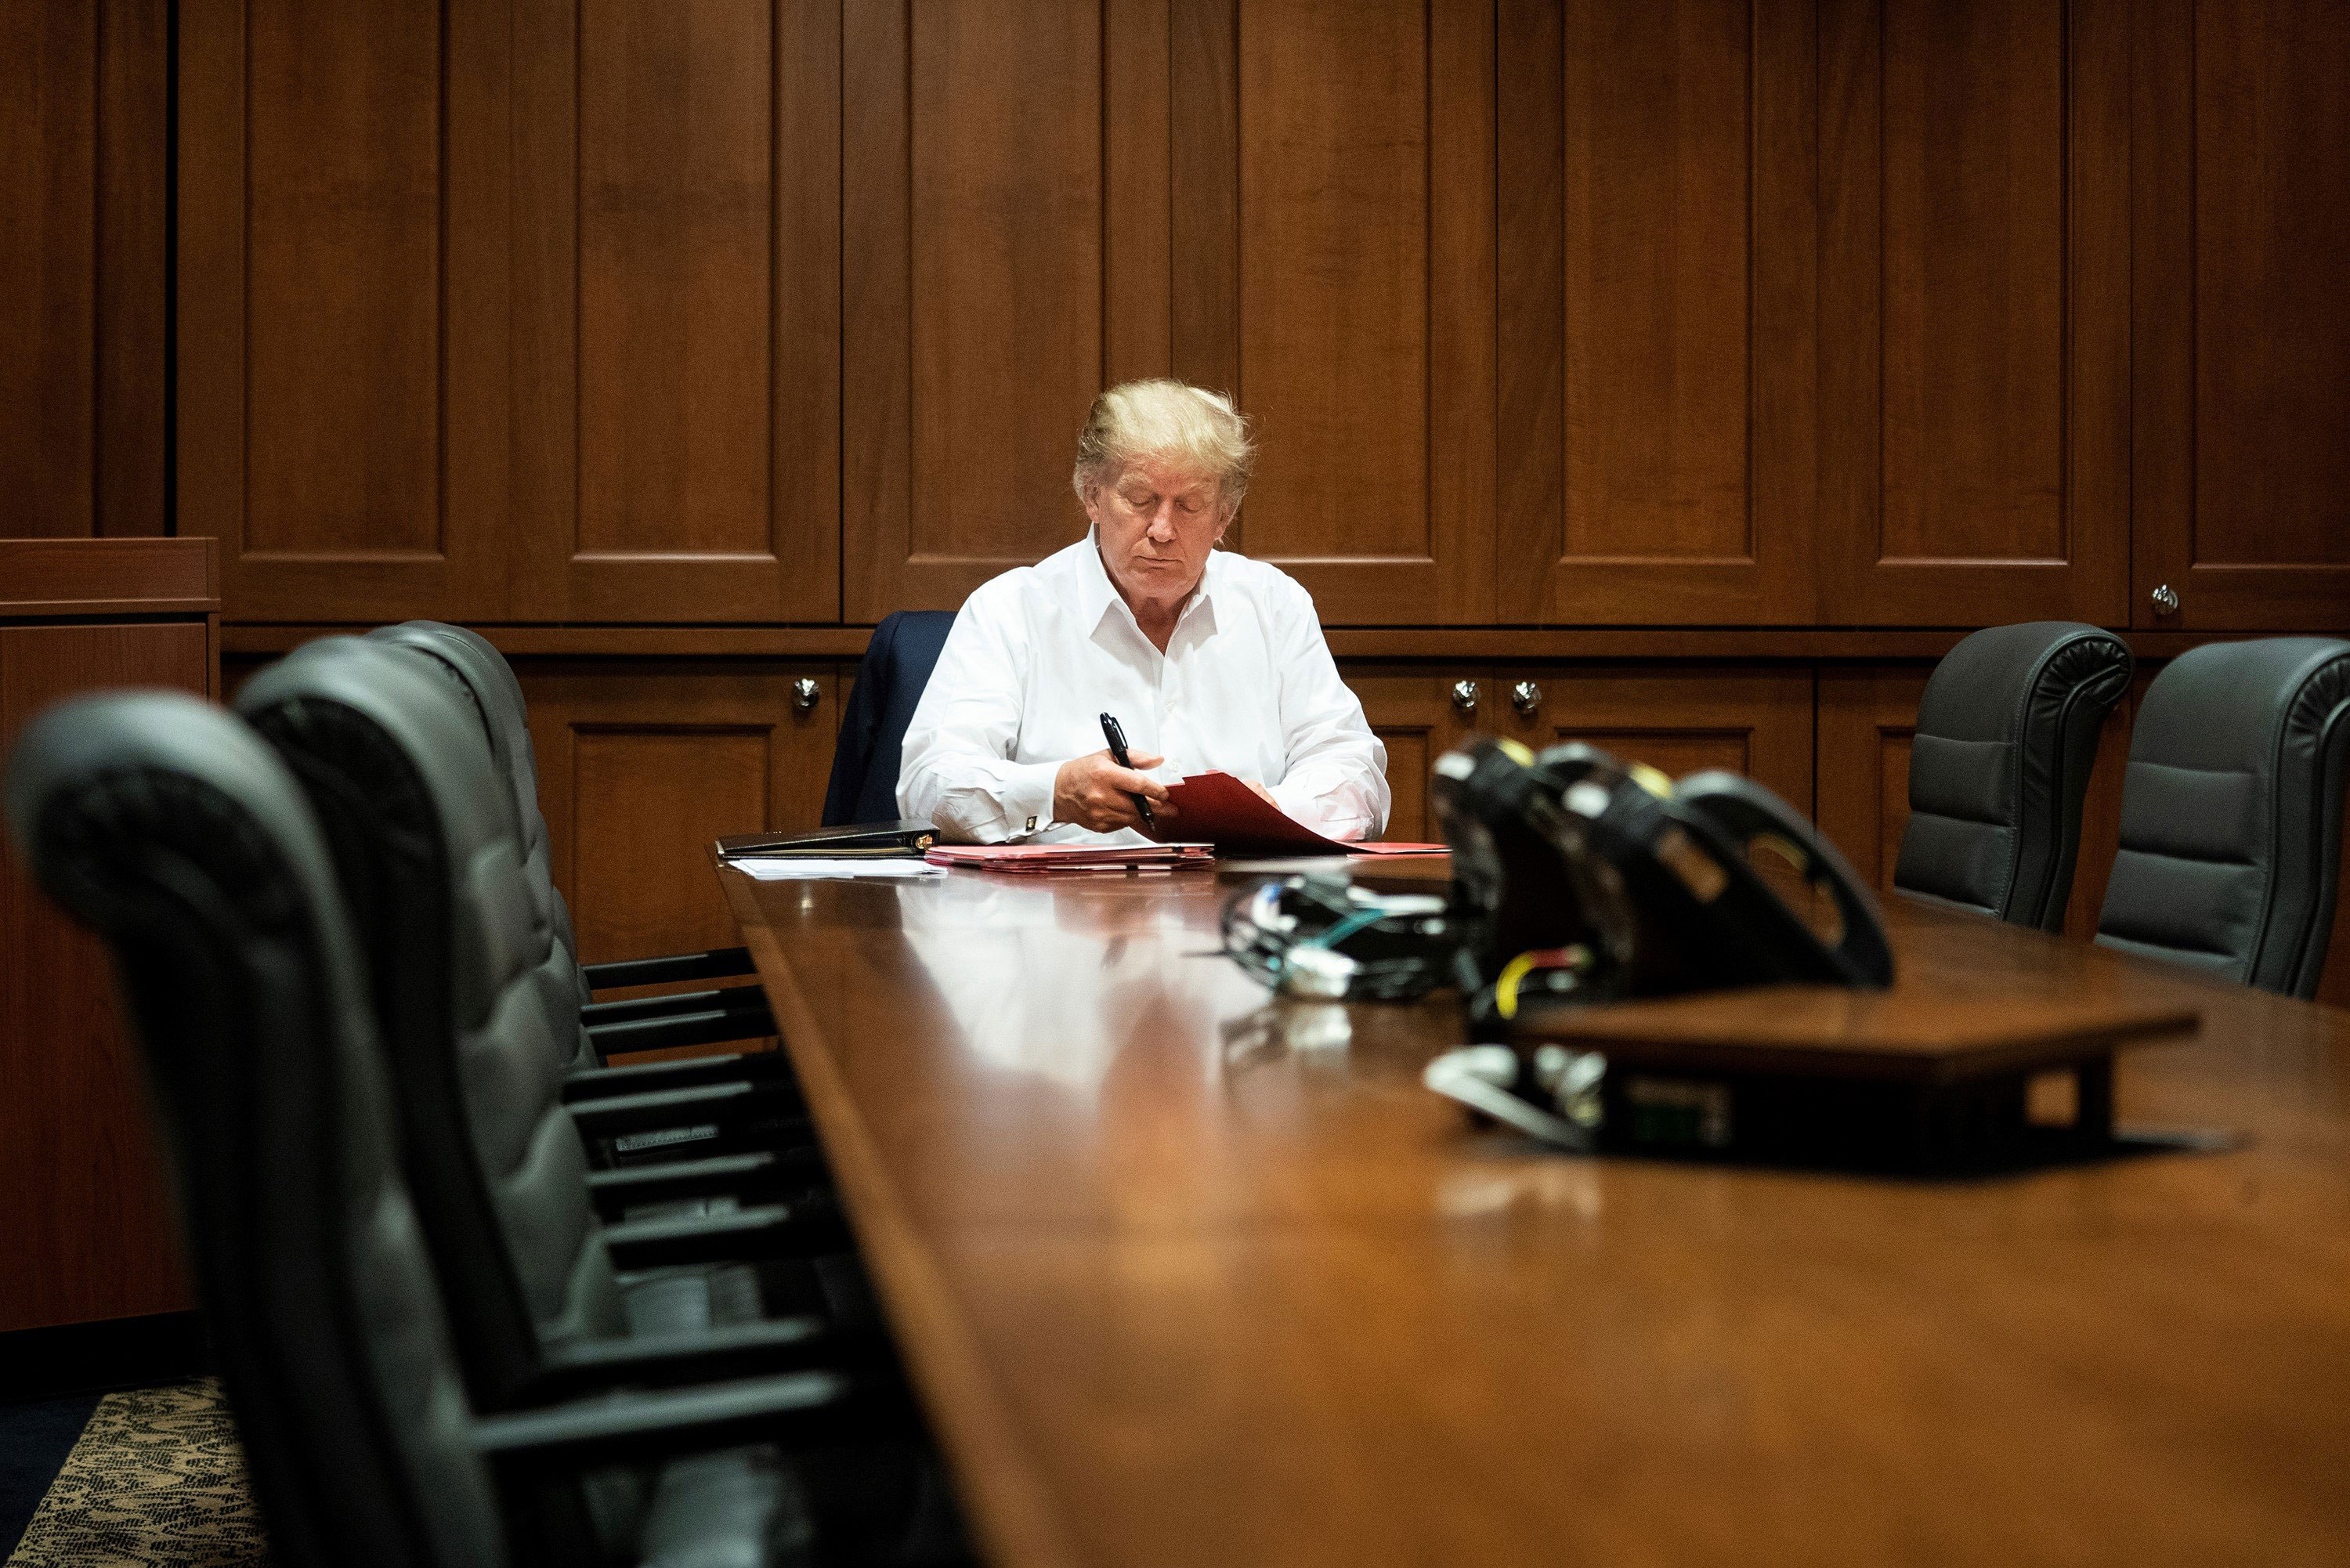 President Donald J. Trump works in his conference room at Walter Reed National Military Medical Center